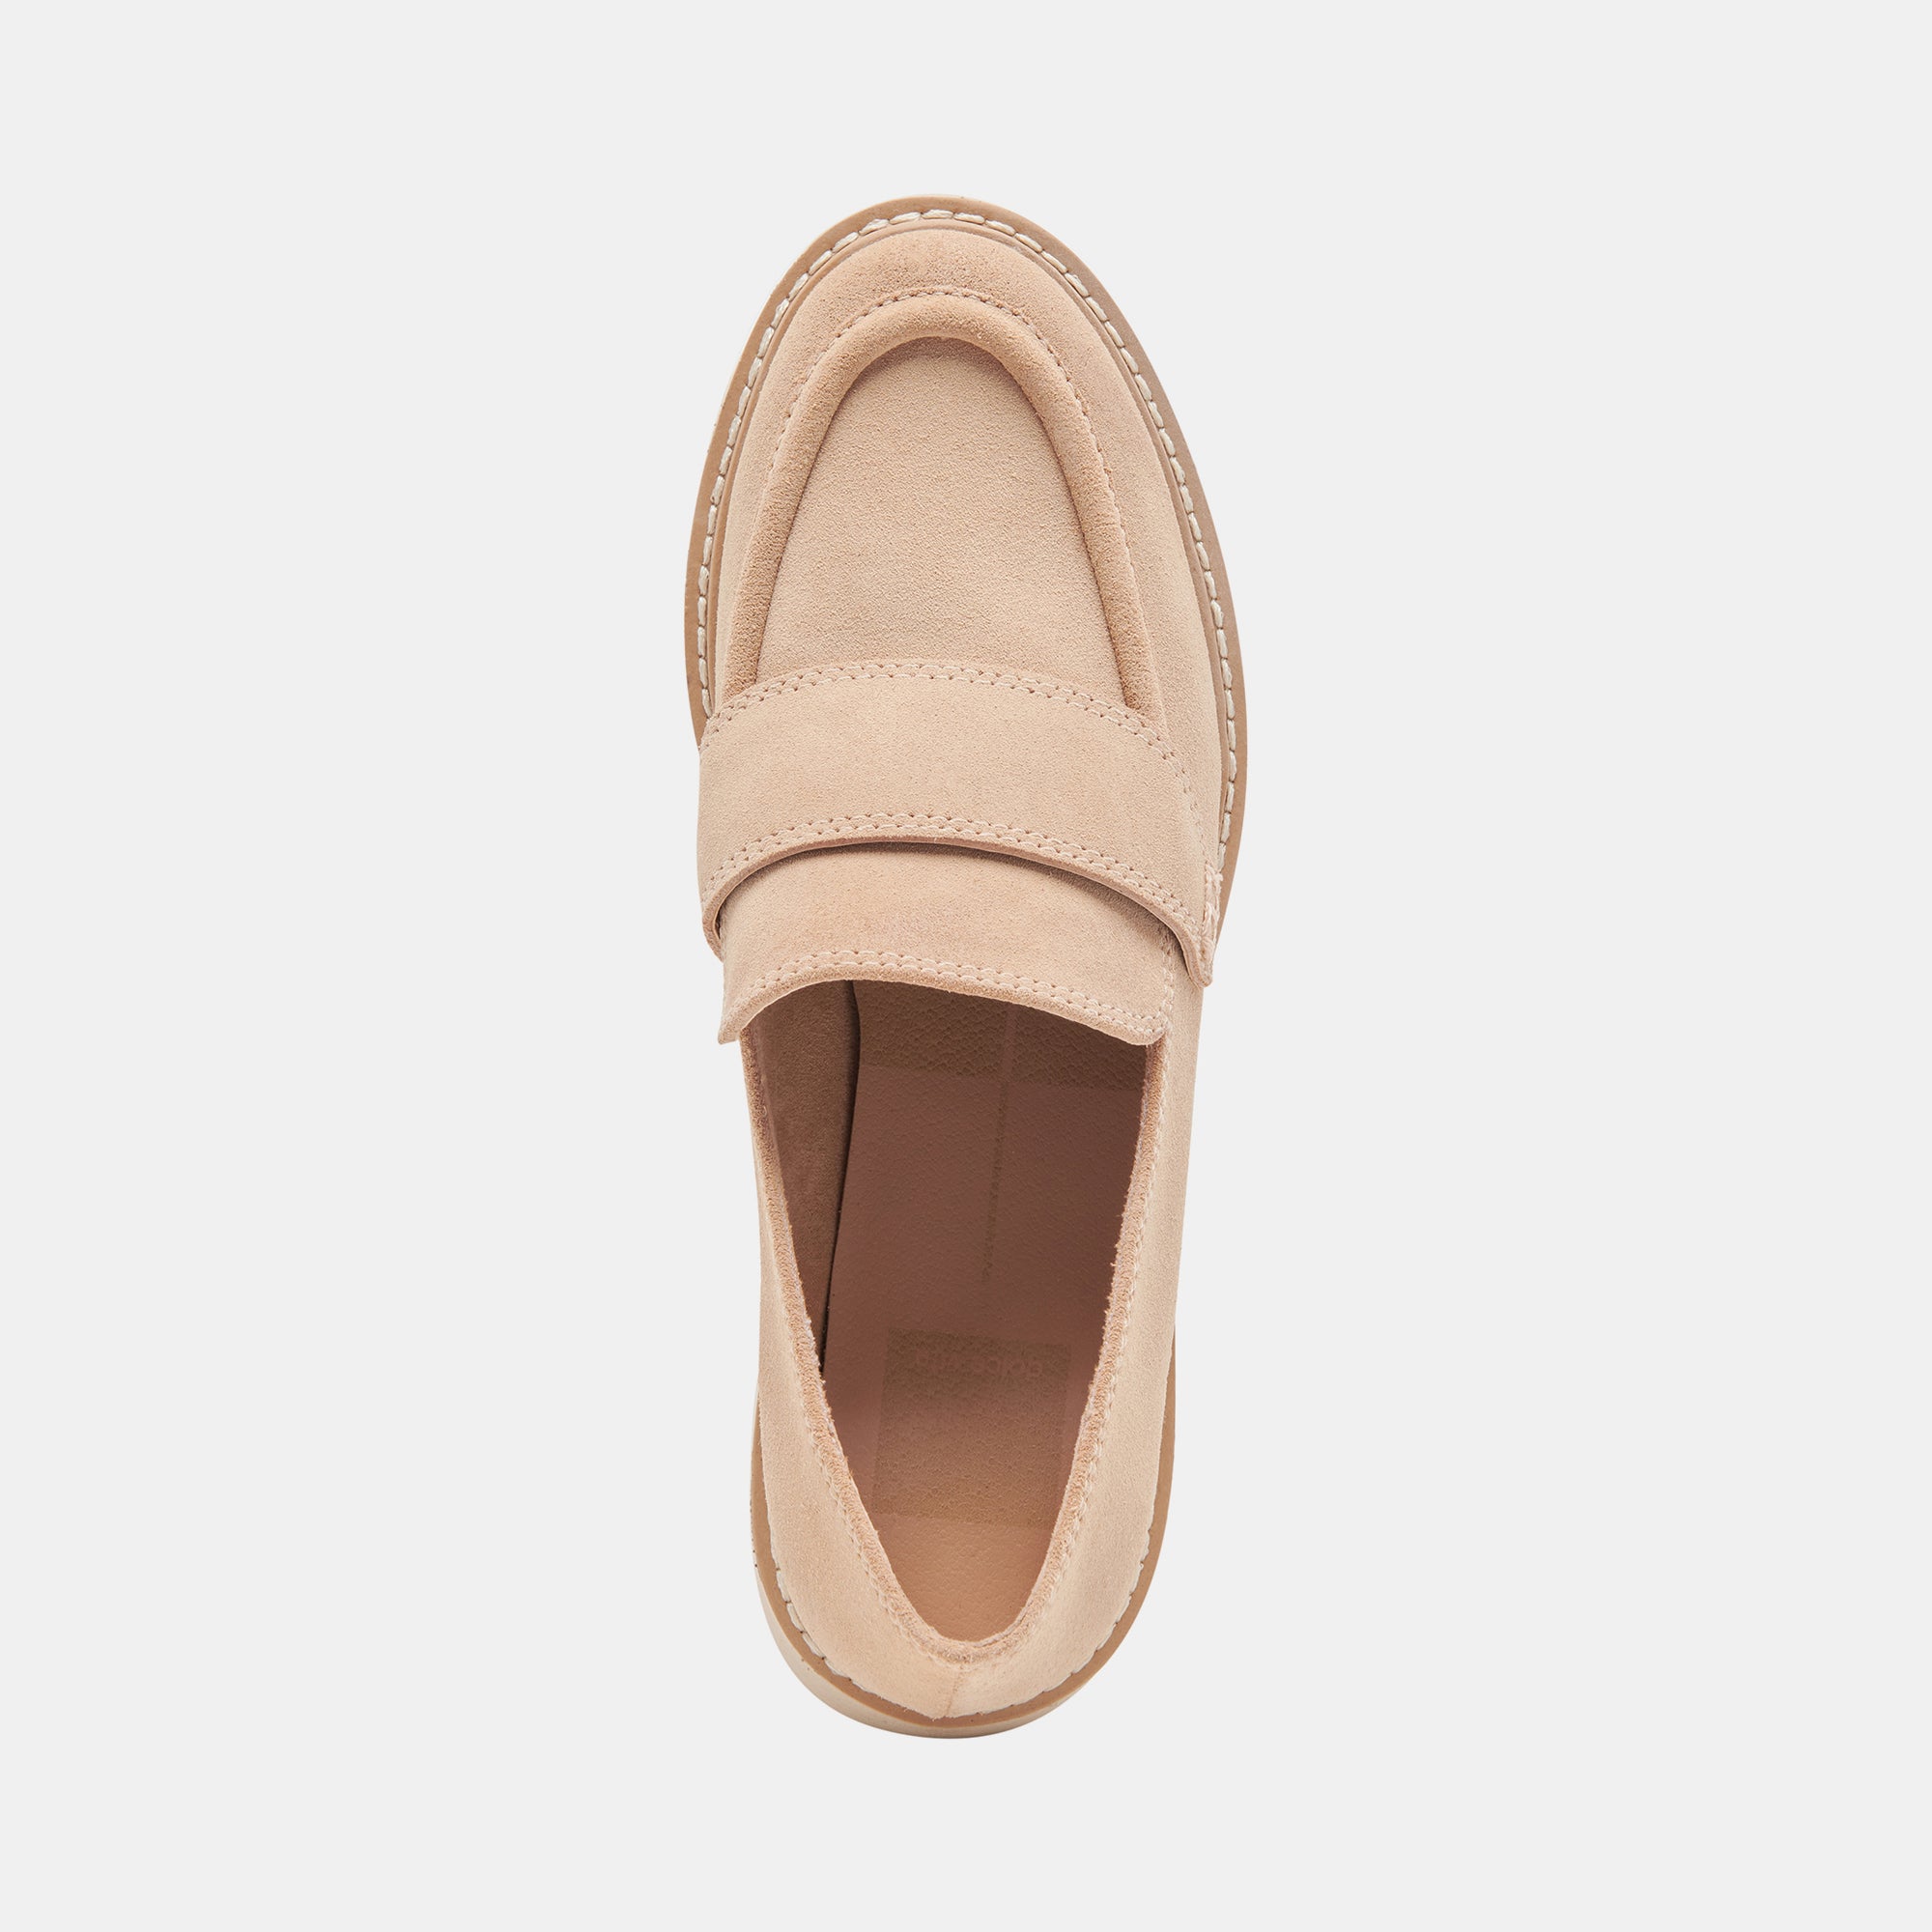 HALONA LOAFERS DUNE SUEDE – Dolce Vita